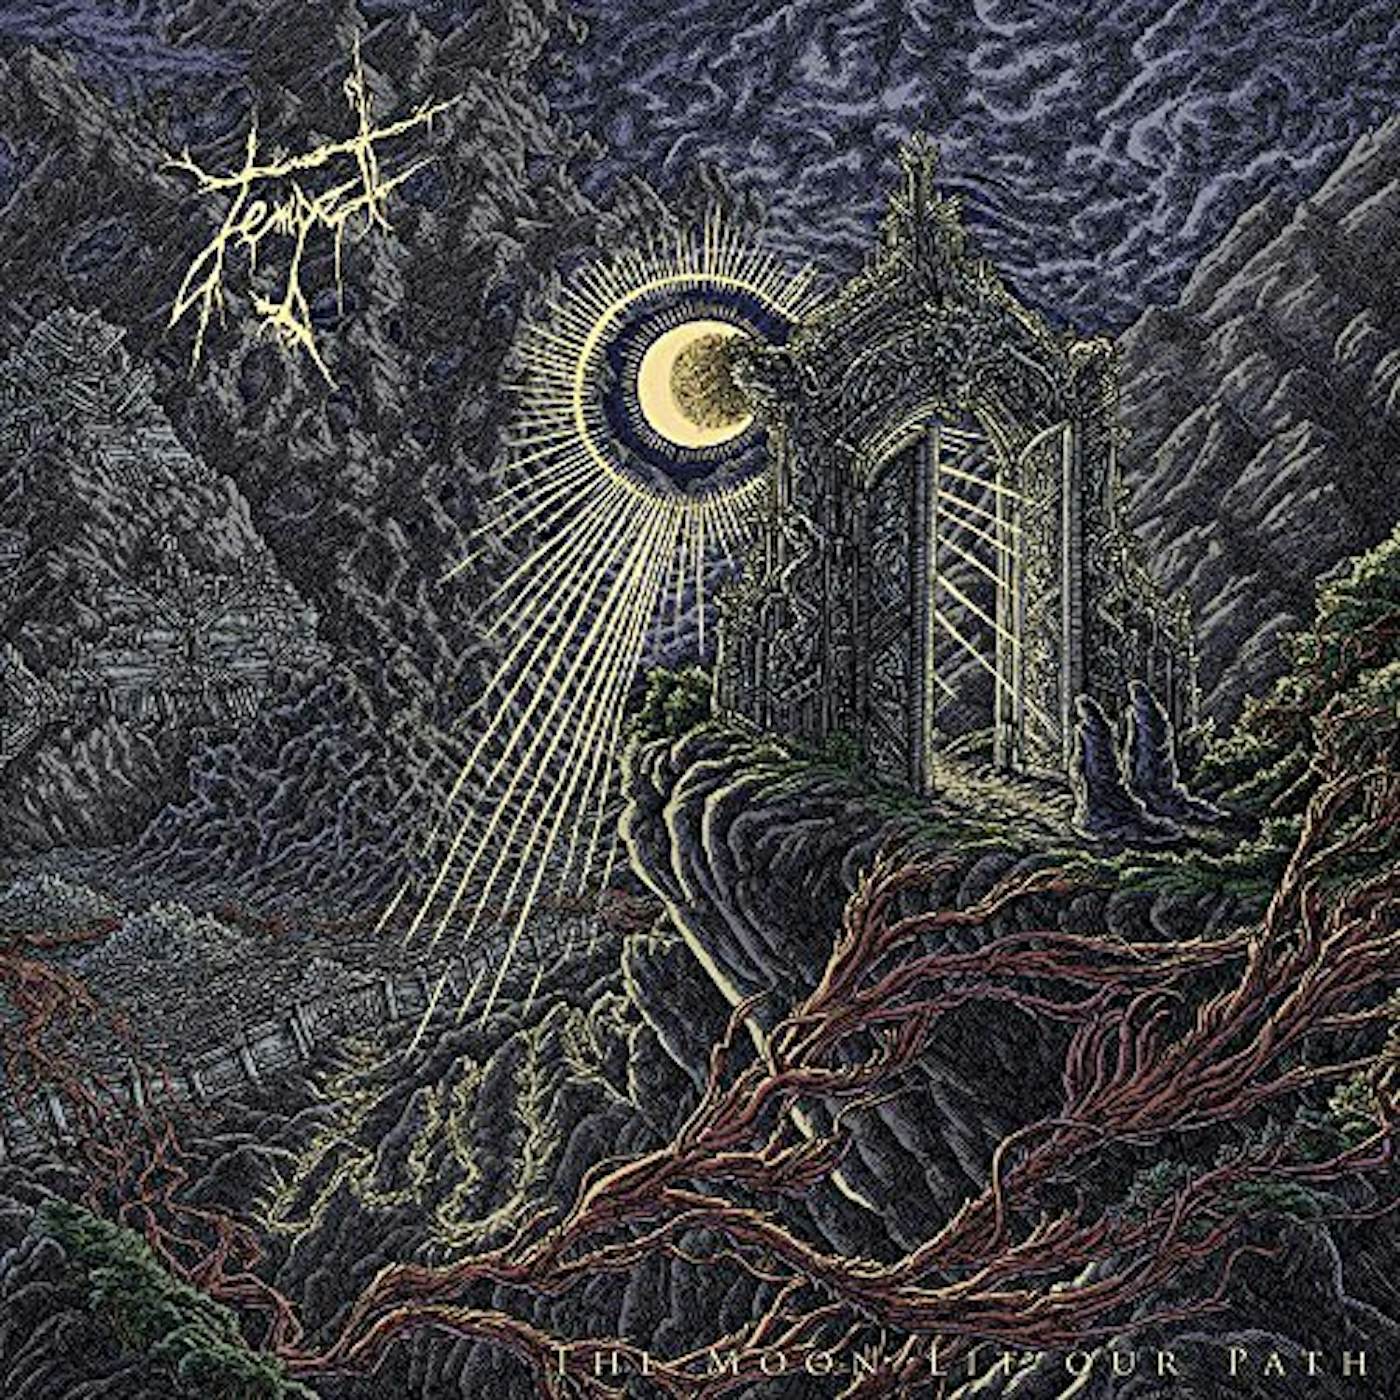 Tempel MOON LIT OUR PATH CD